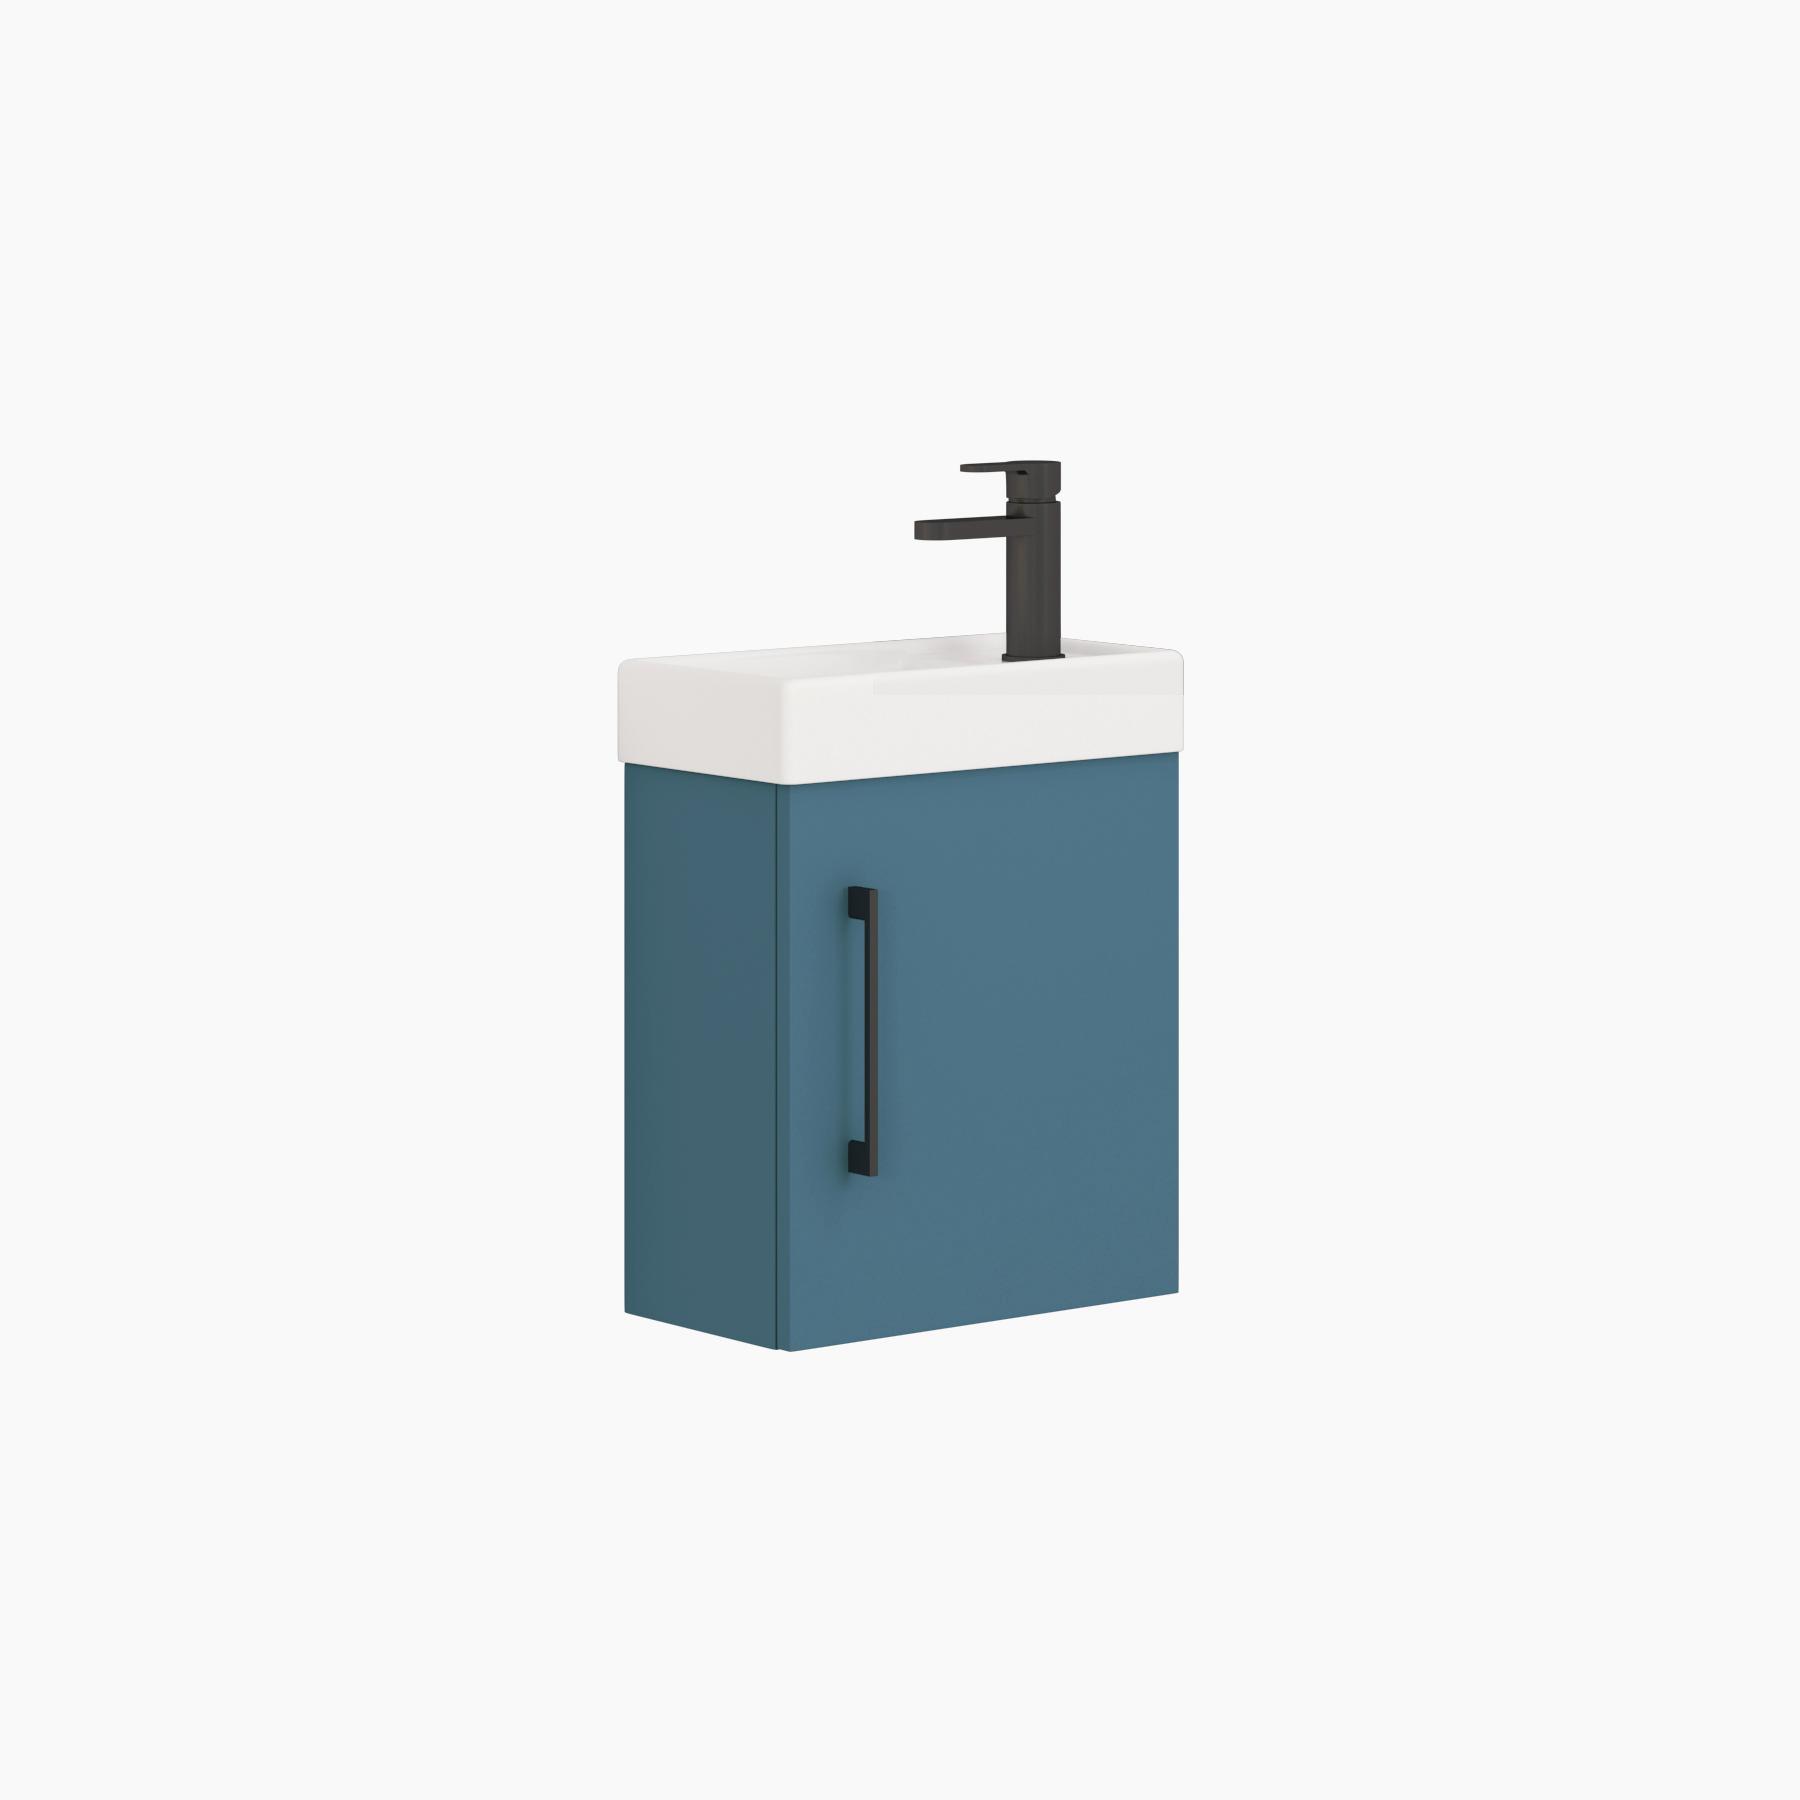 Modena 400mm Satin Blue Cloakroom Compact Wall Hung Vanity Sink Unit with Black Handle - 1 Door